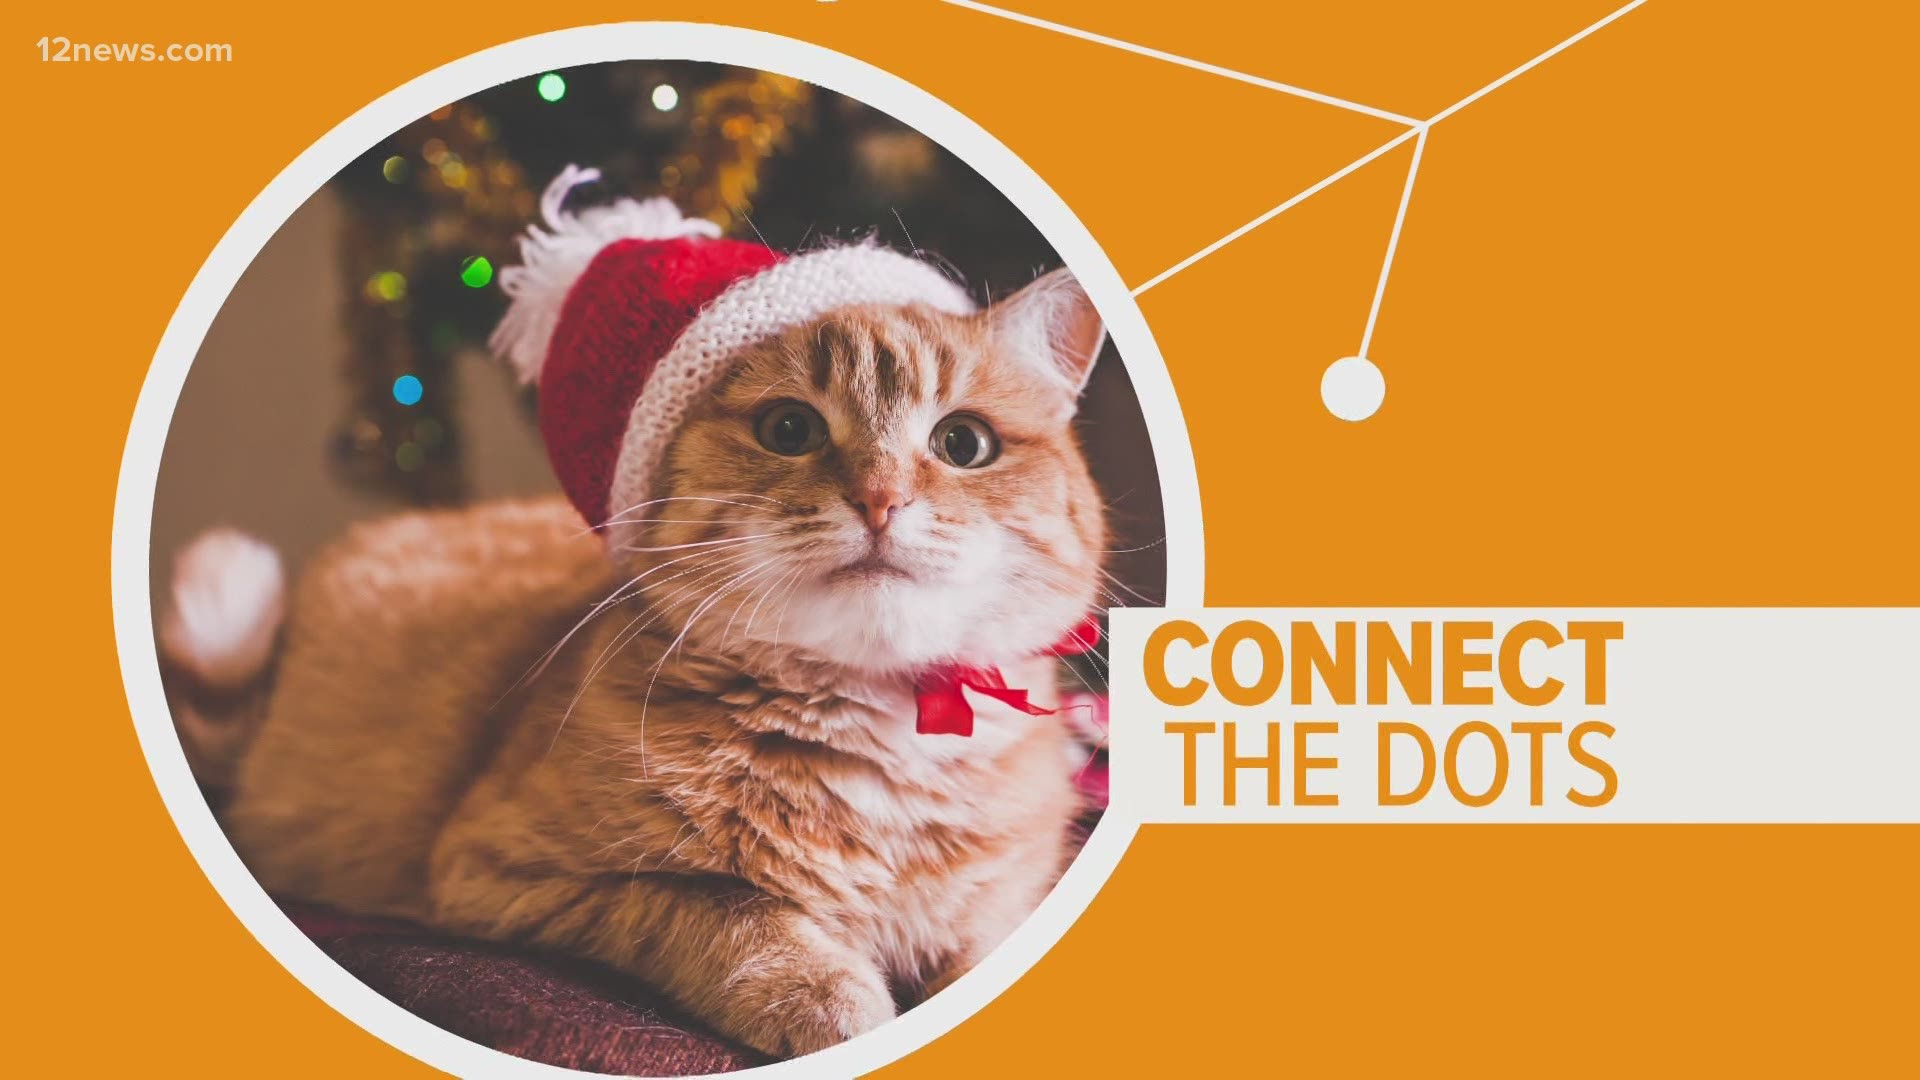 There are a few things we need to keep in mind to make sure we keep our pets safe during the holidays.